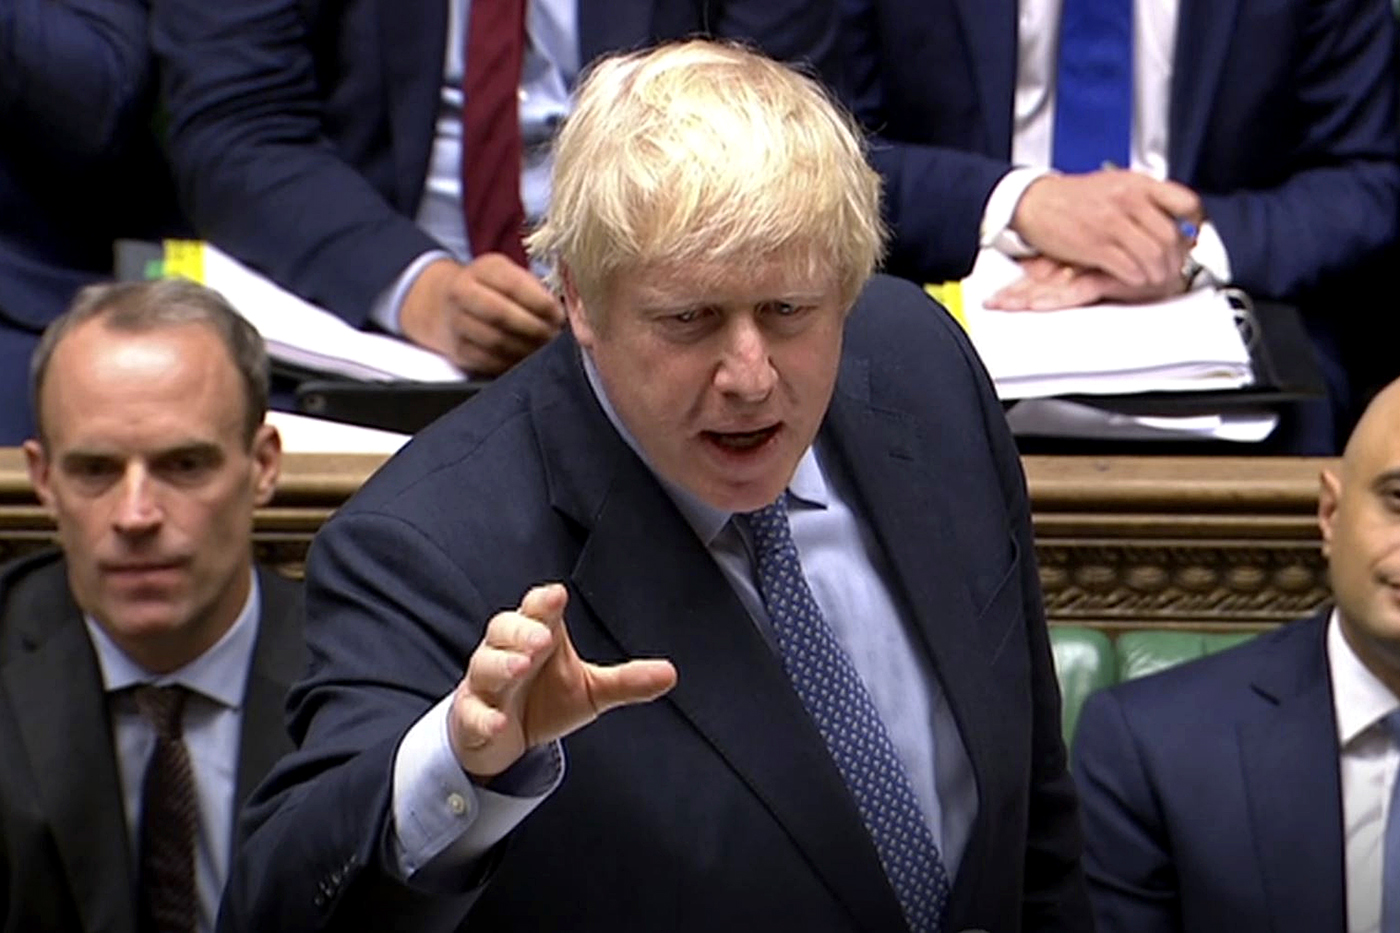 Britain, Brexit, and Boris Johnson: What you need to know